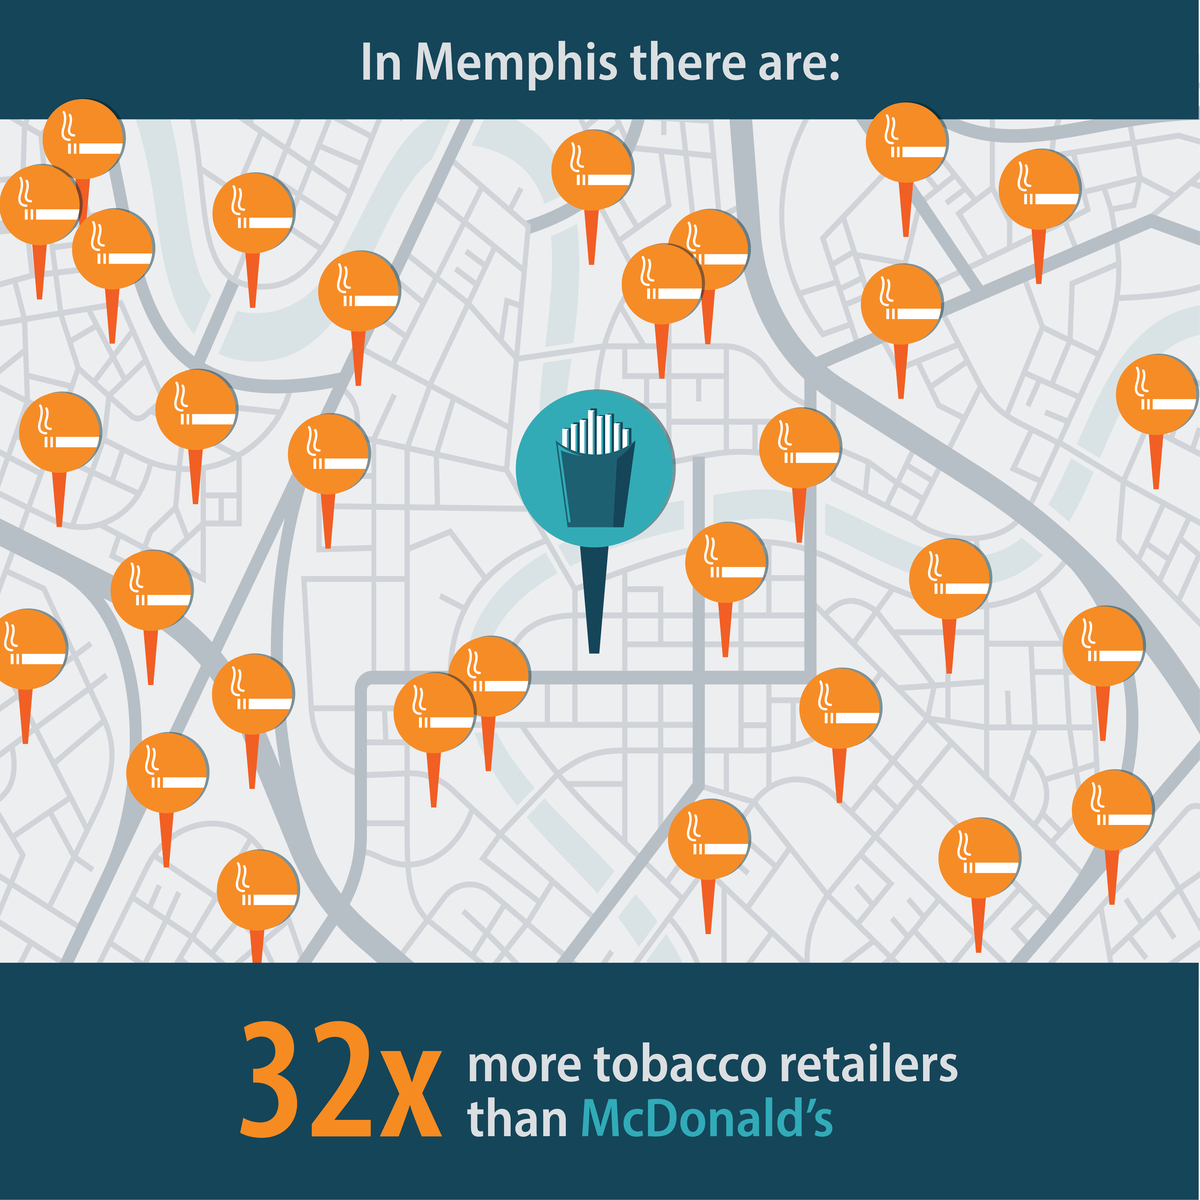 In Memphis there are: 32 times more tobacco retailers than McDonald's